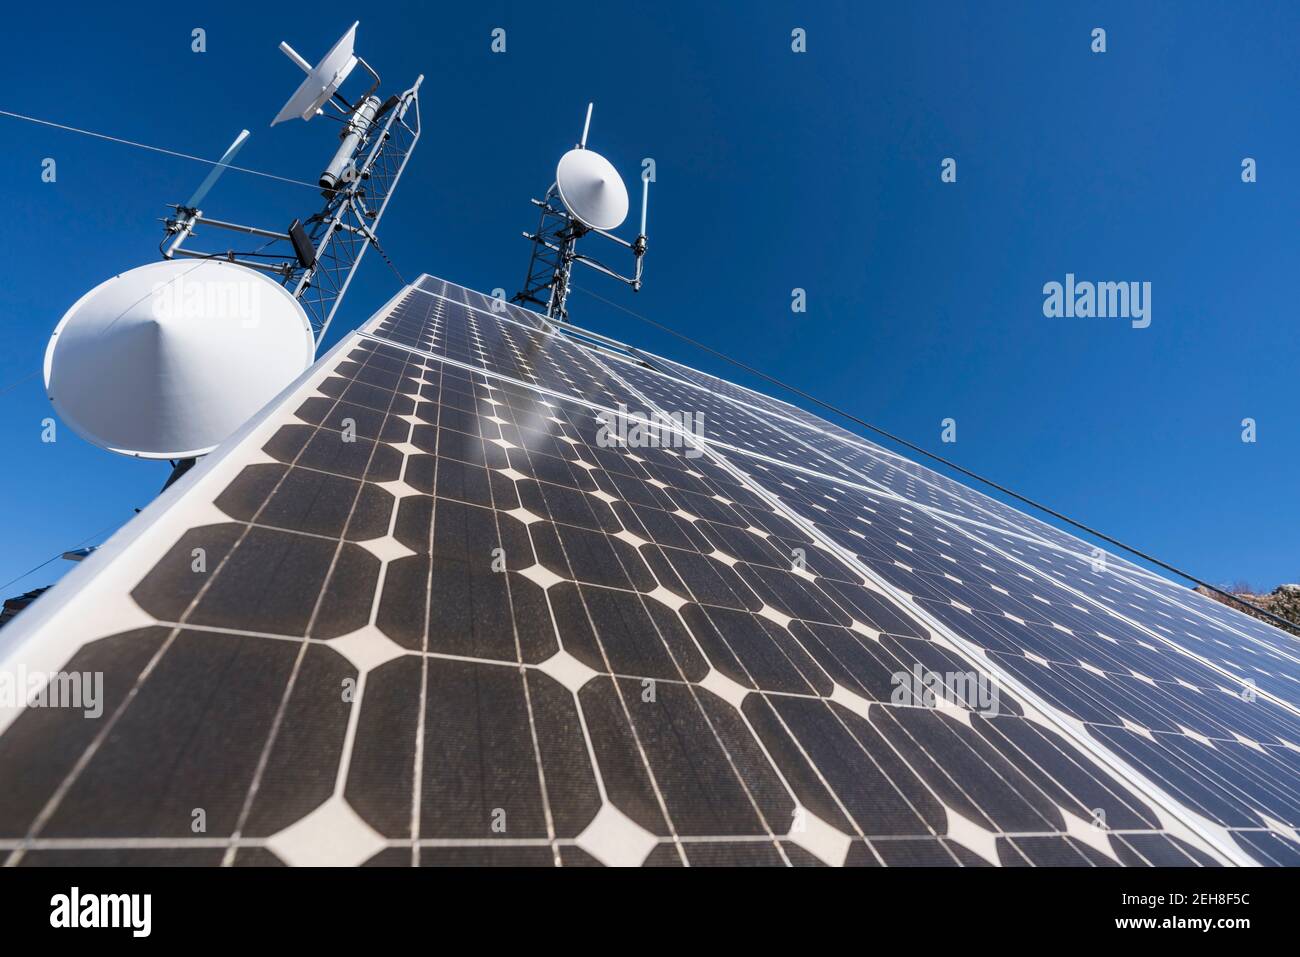 Solar panels powering mountain peak communications equipment in the Angeles National Forest and San Gabriel Mountains near Los Angeles, California. Stock Photo